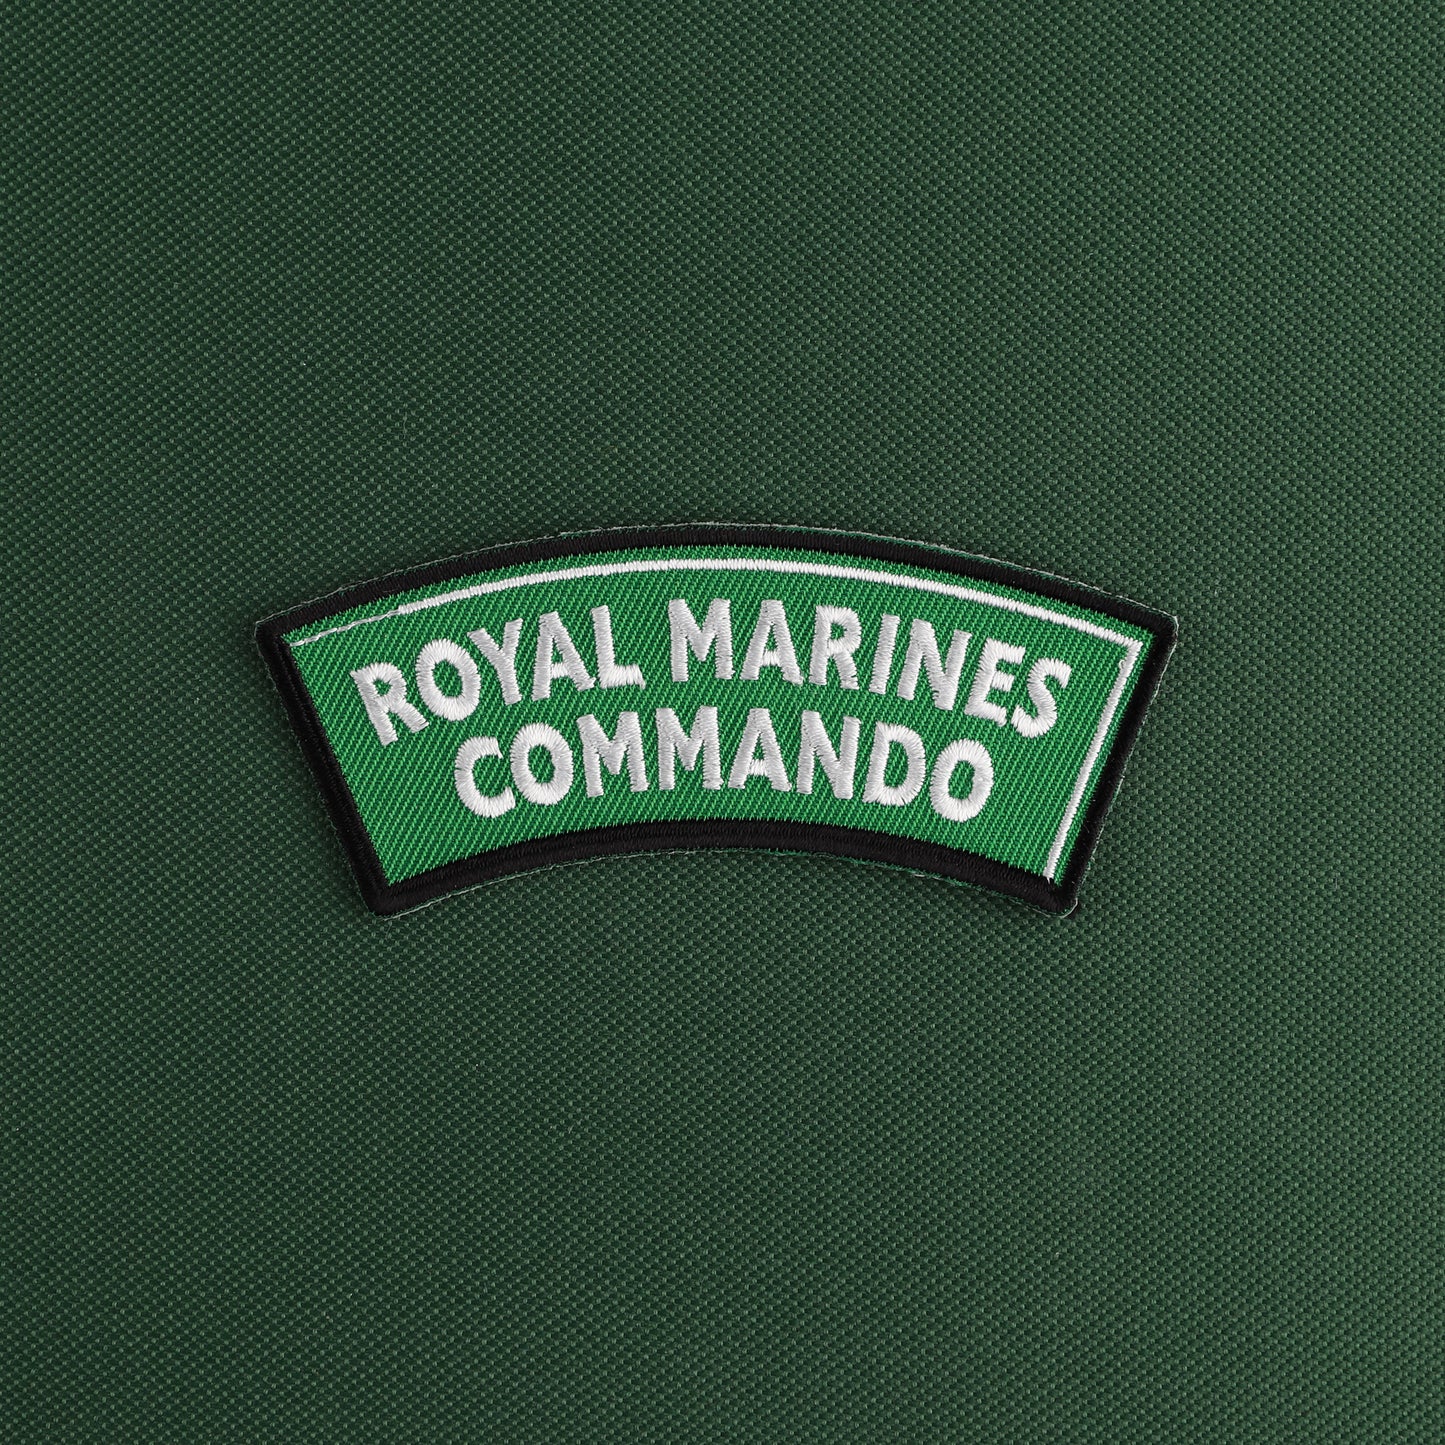 Royal Marines Commando Embroidered Patch – Aspinline Shop